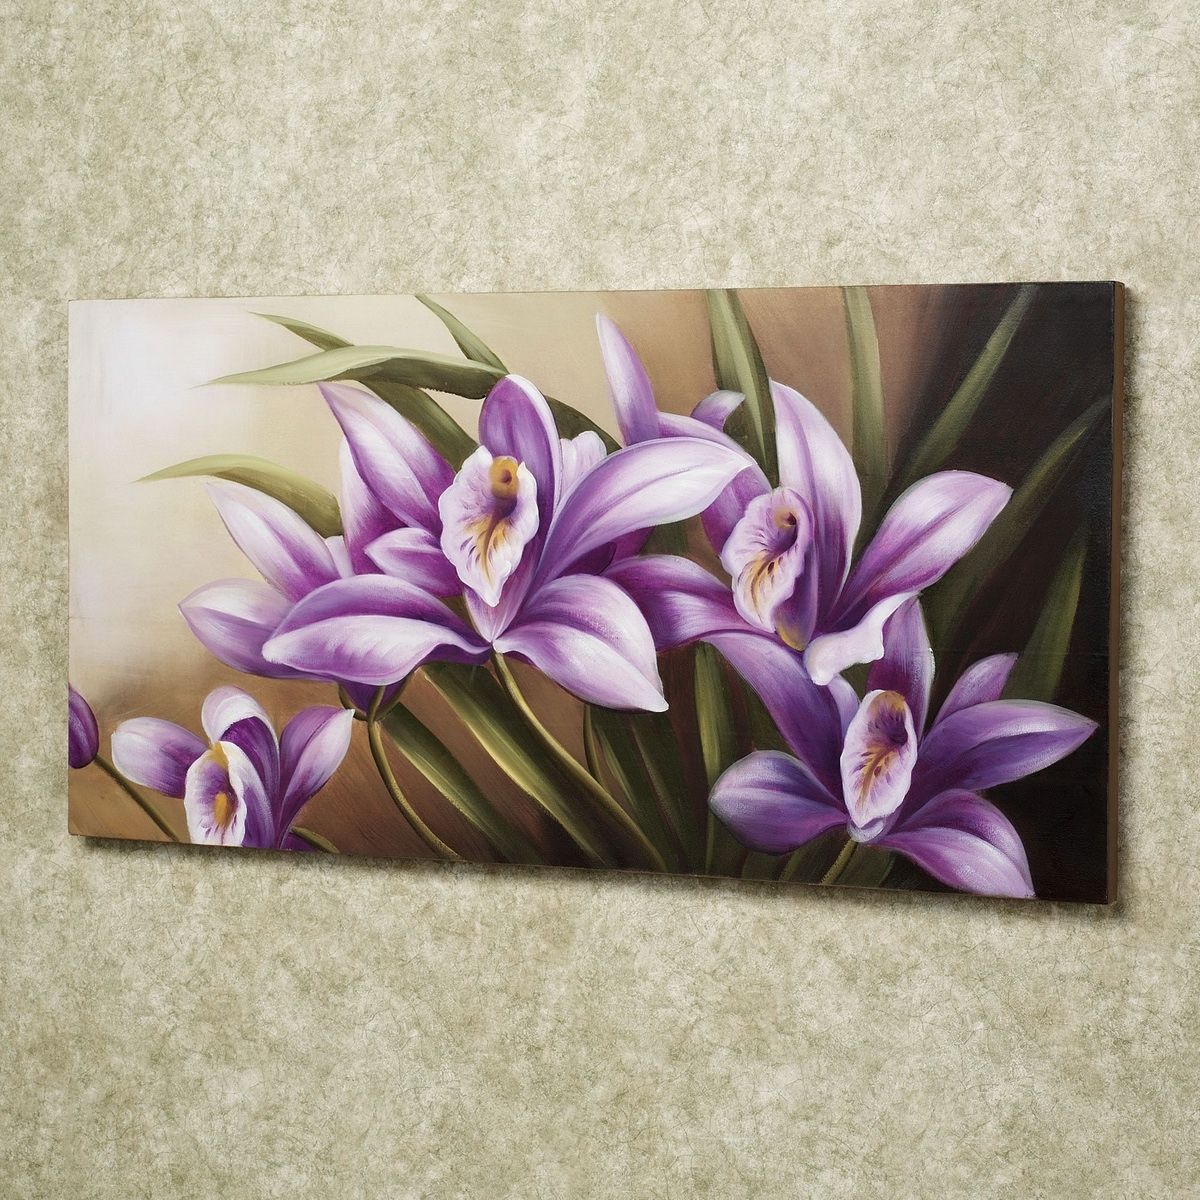 Current Flower Wall Art Canvas Throughout Wall Art Designs: Canvas Wall Art Beautiful Flower Painting On (View 10 of 15)